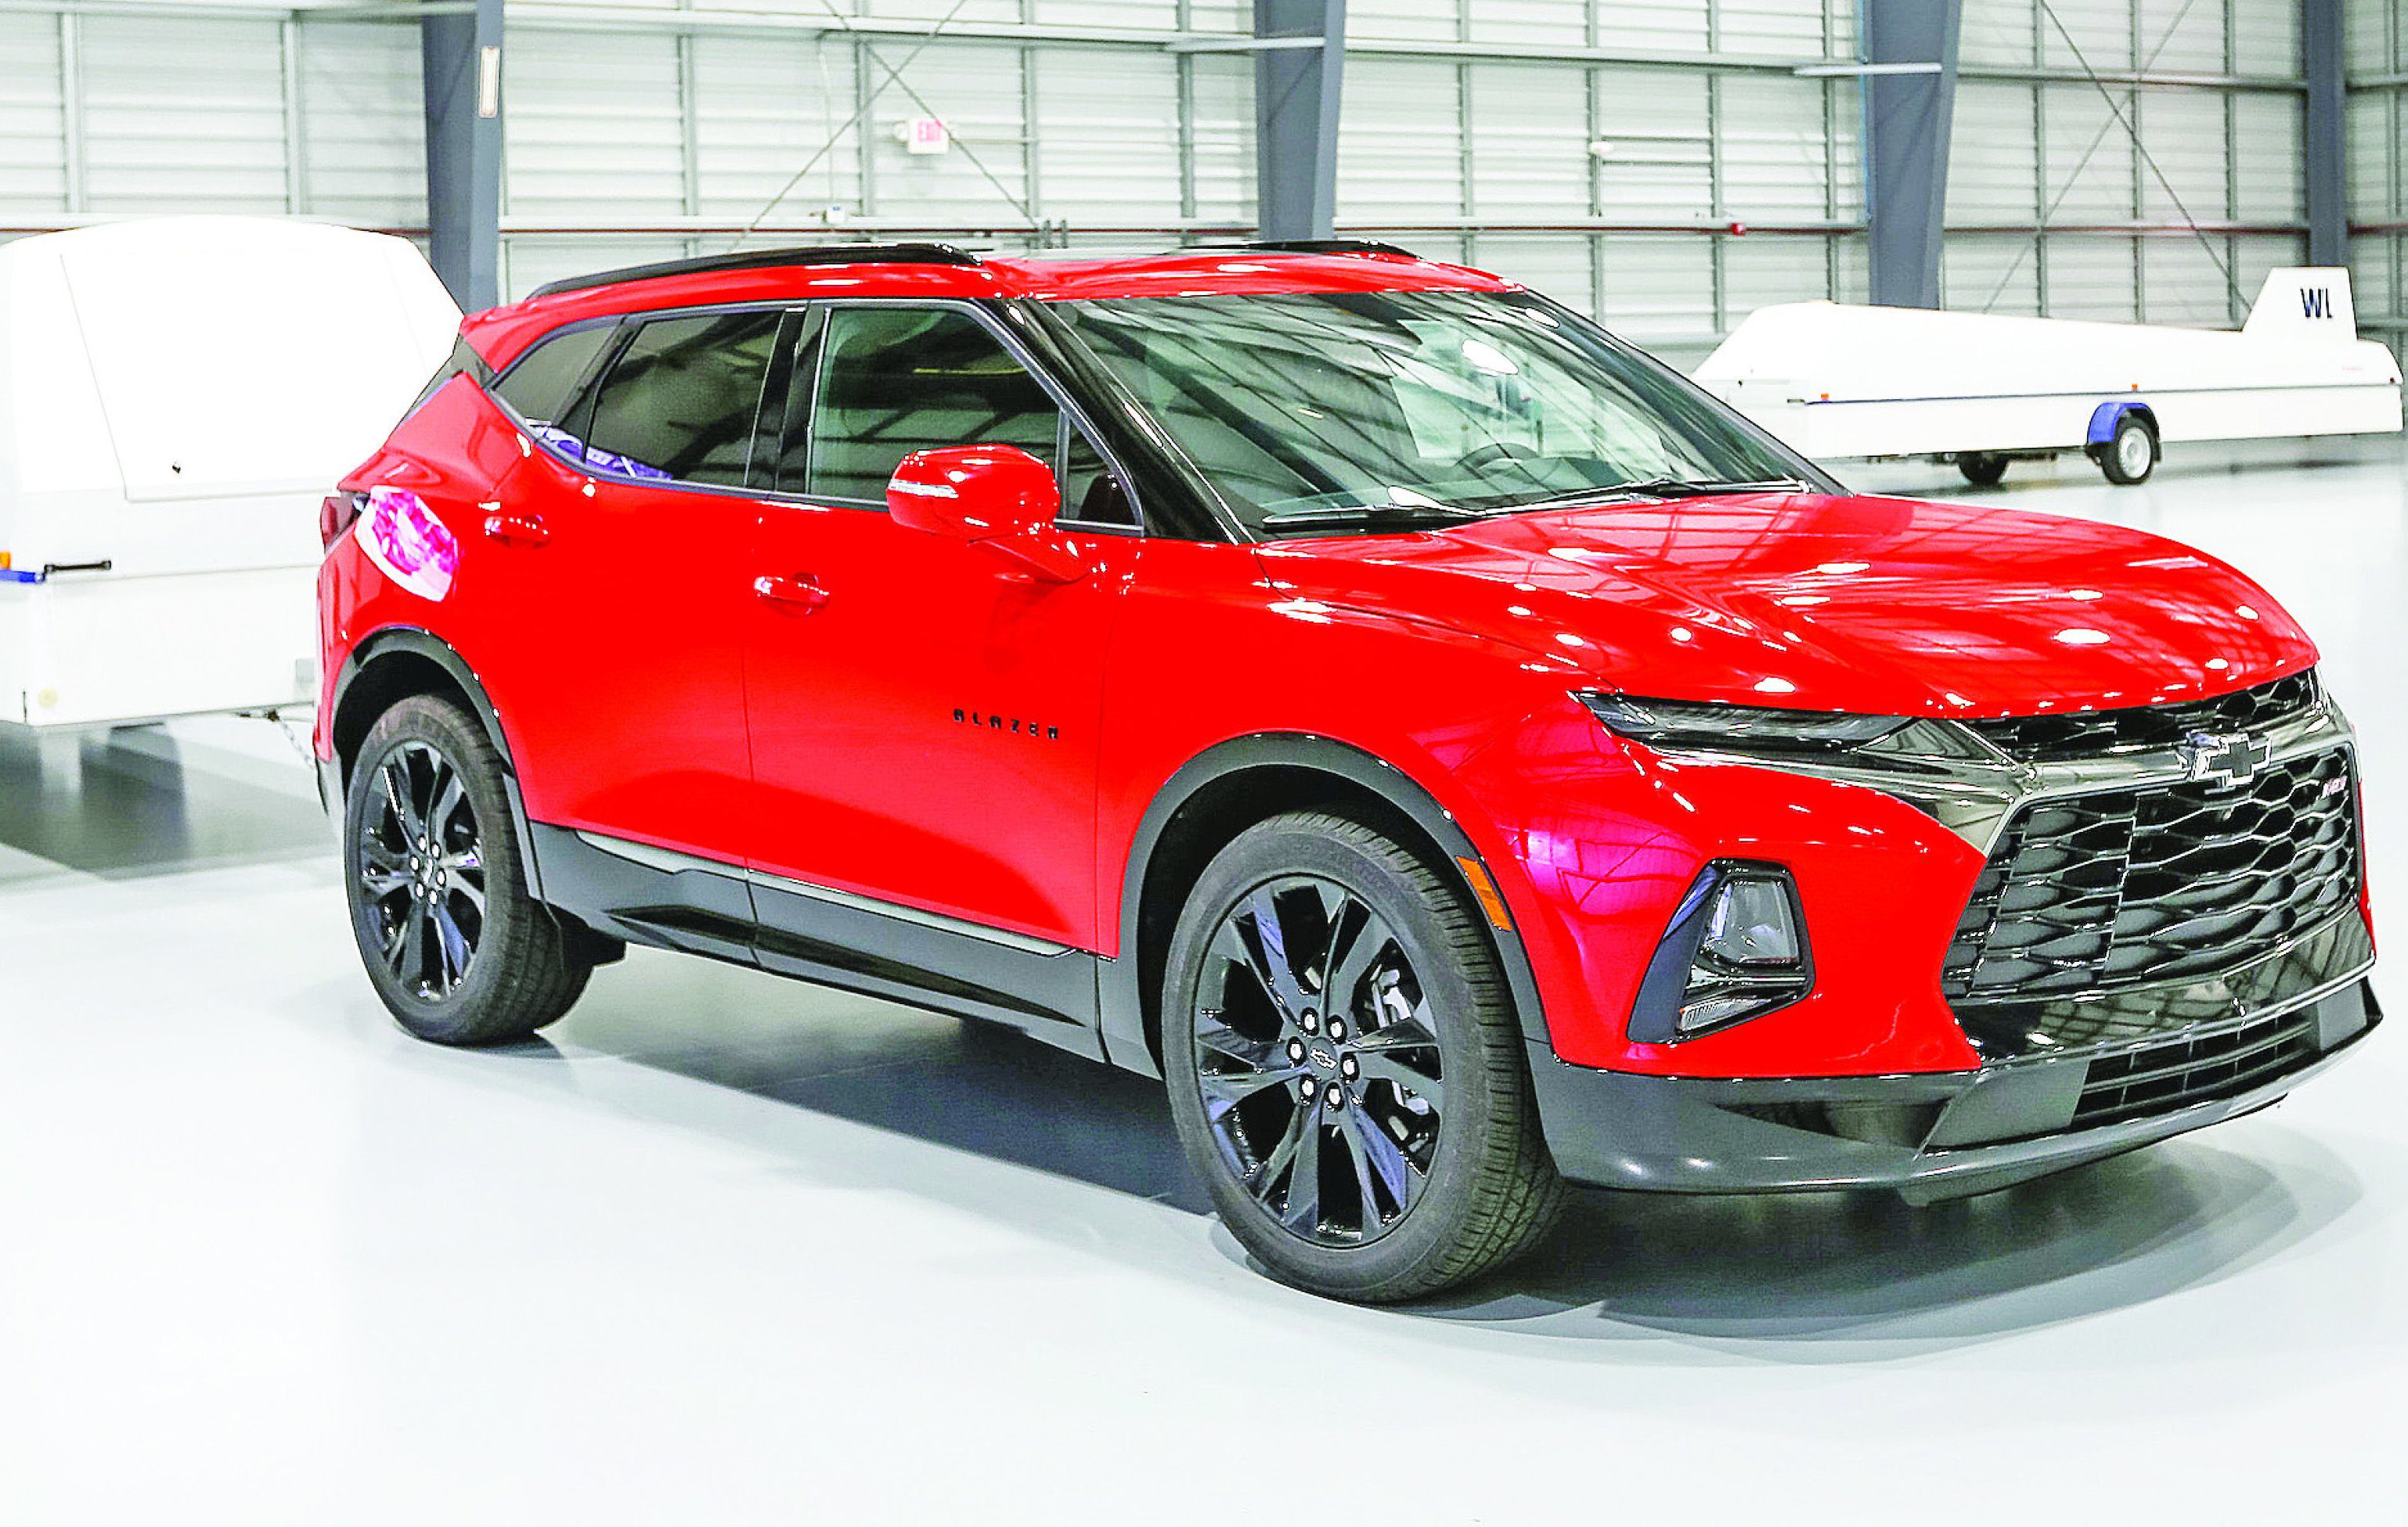 The 2019 Chevrolet Blazer review – The North State Journal